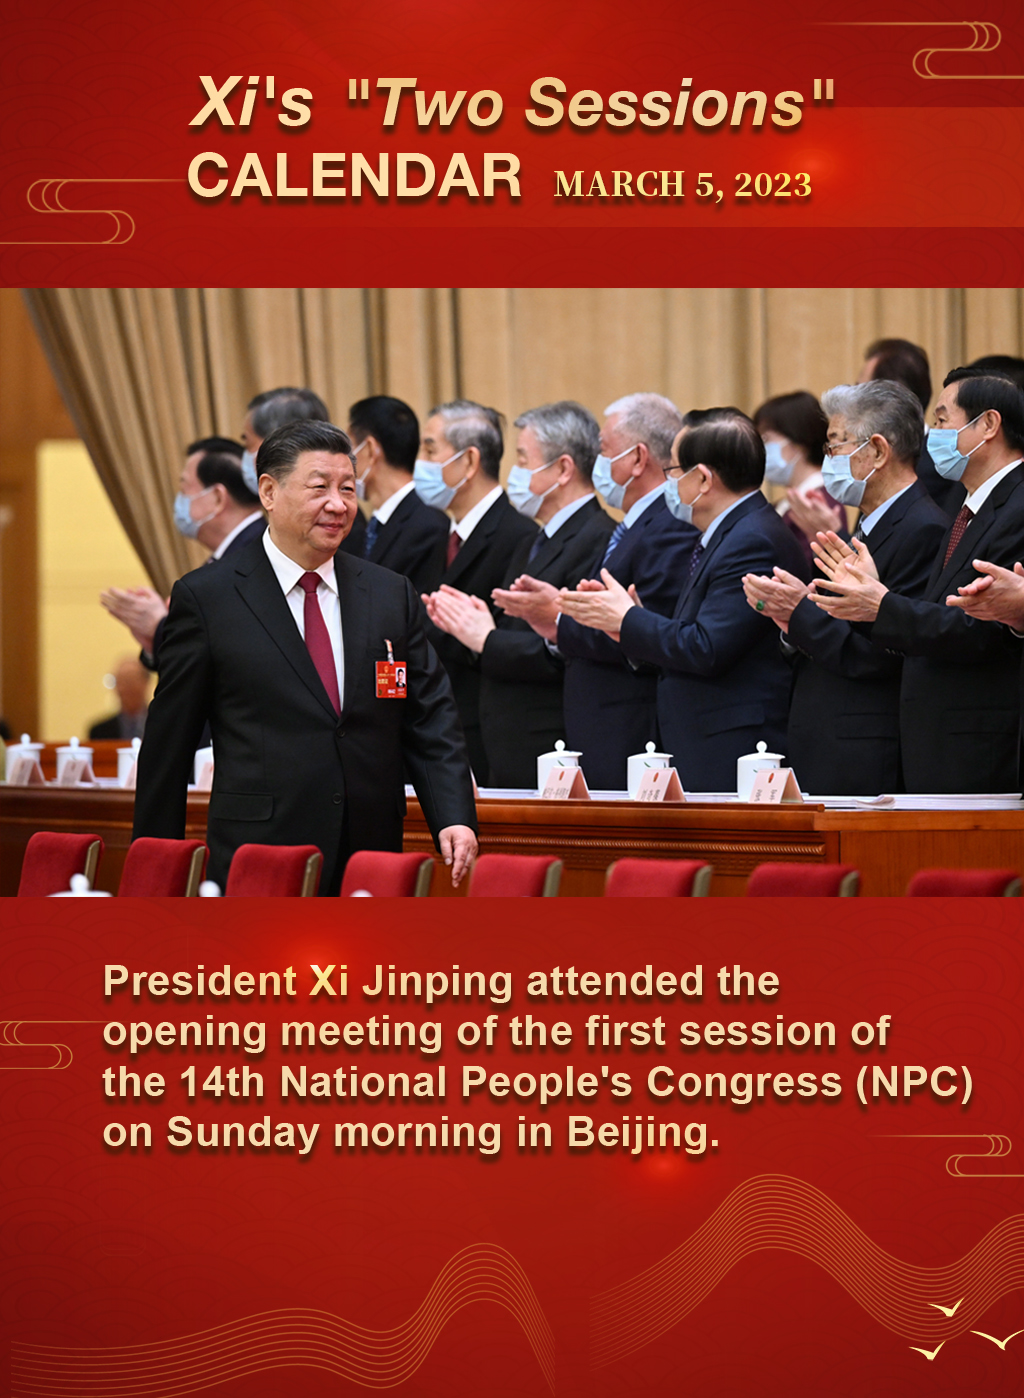 Xi's "Two Sessions" Calendar: Xi attends opening meeting of NPC annual session